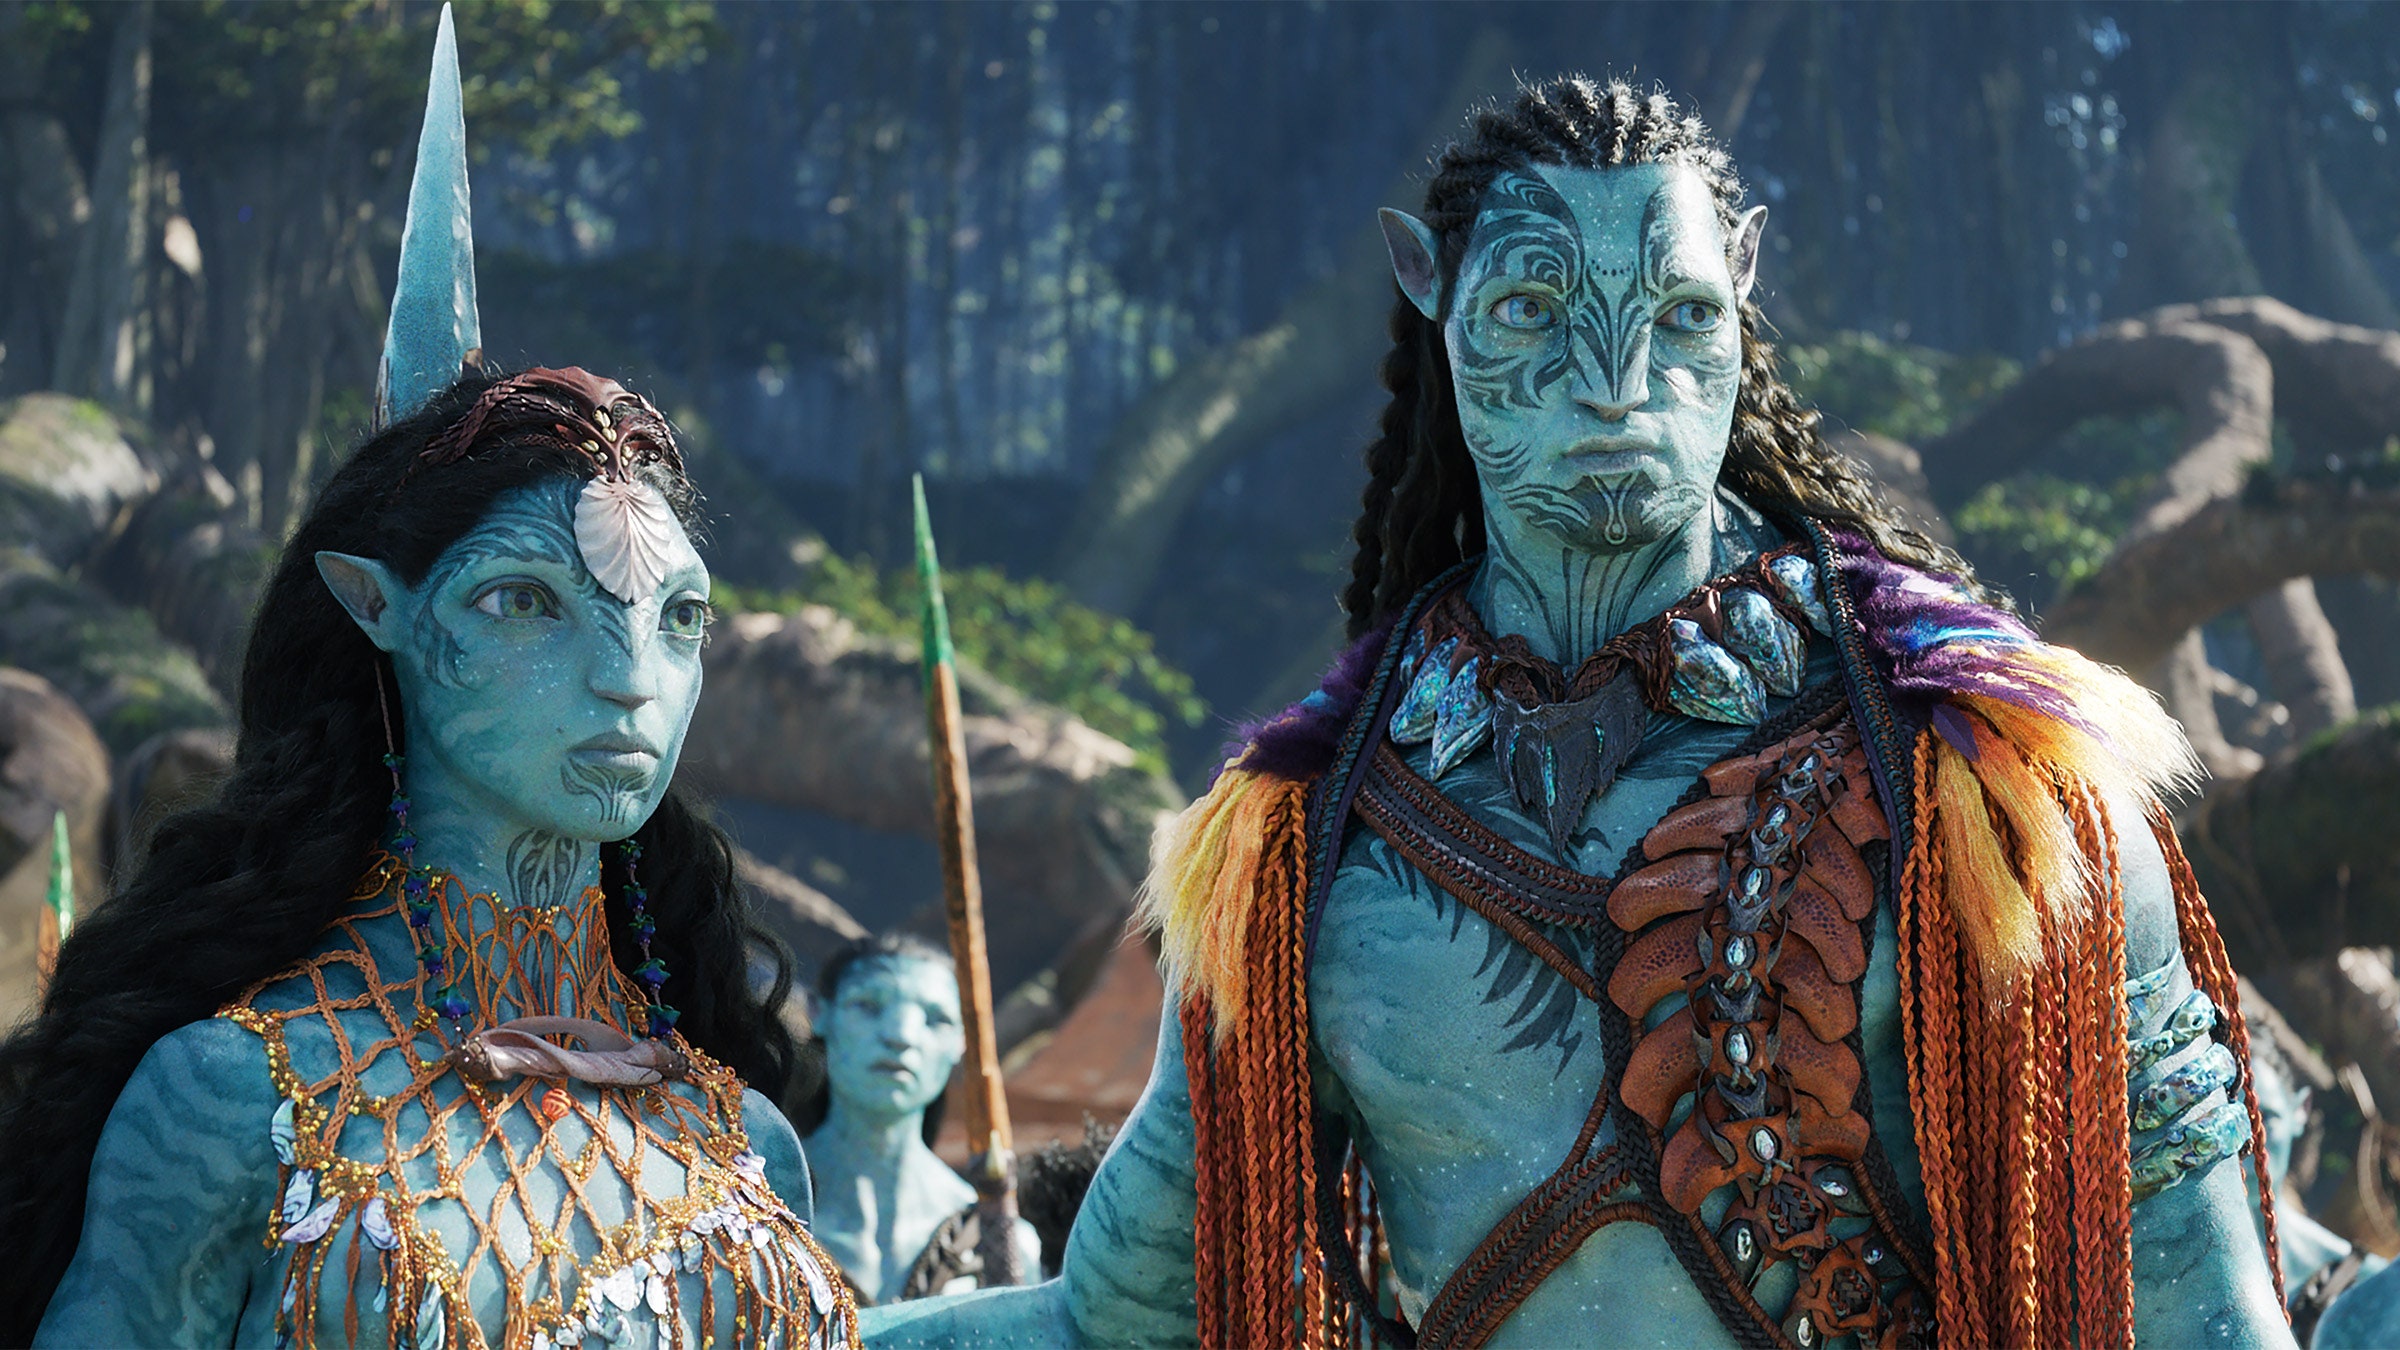 Is Avatar 2 Coming Out on Netflix Prime Video and HBO Max   GameRevolution